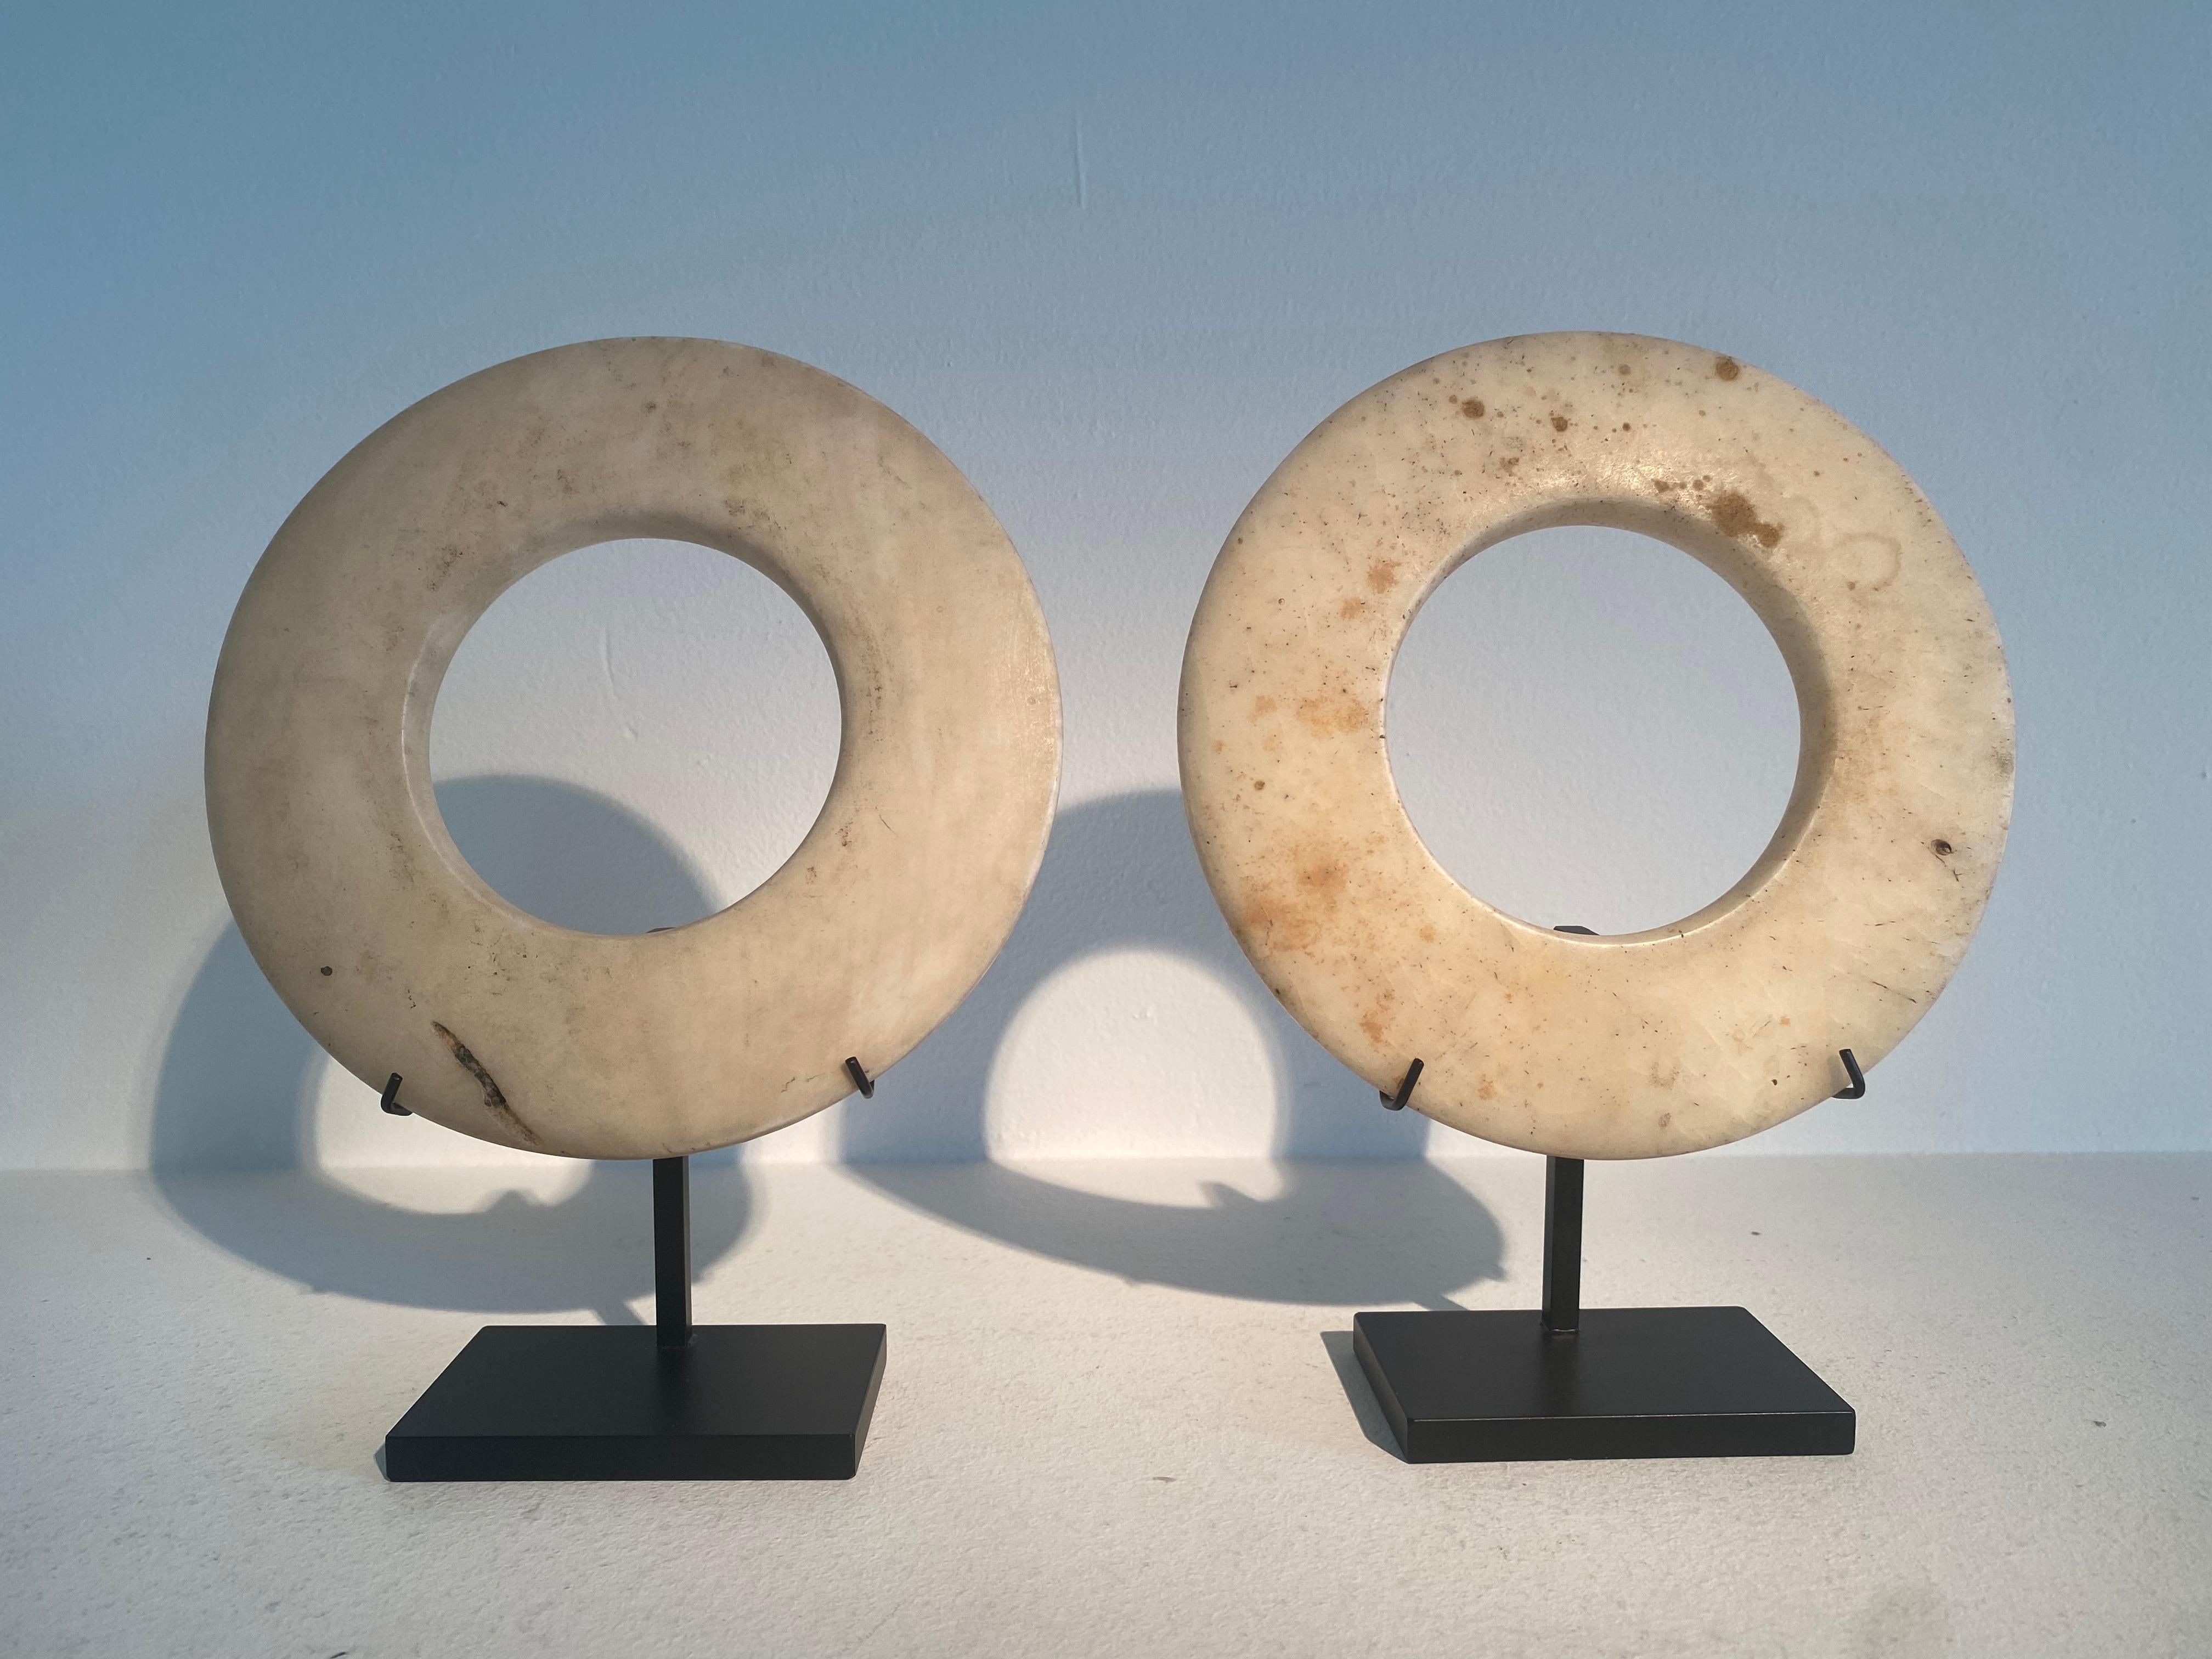 Pair of Bracelets in Tridacna Gigas Shell,
Oceanie,
Collection of Dutch Monks, Pater Maristen,
great, good old patina,
very decorative pair of objects to be used in various spaces.